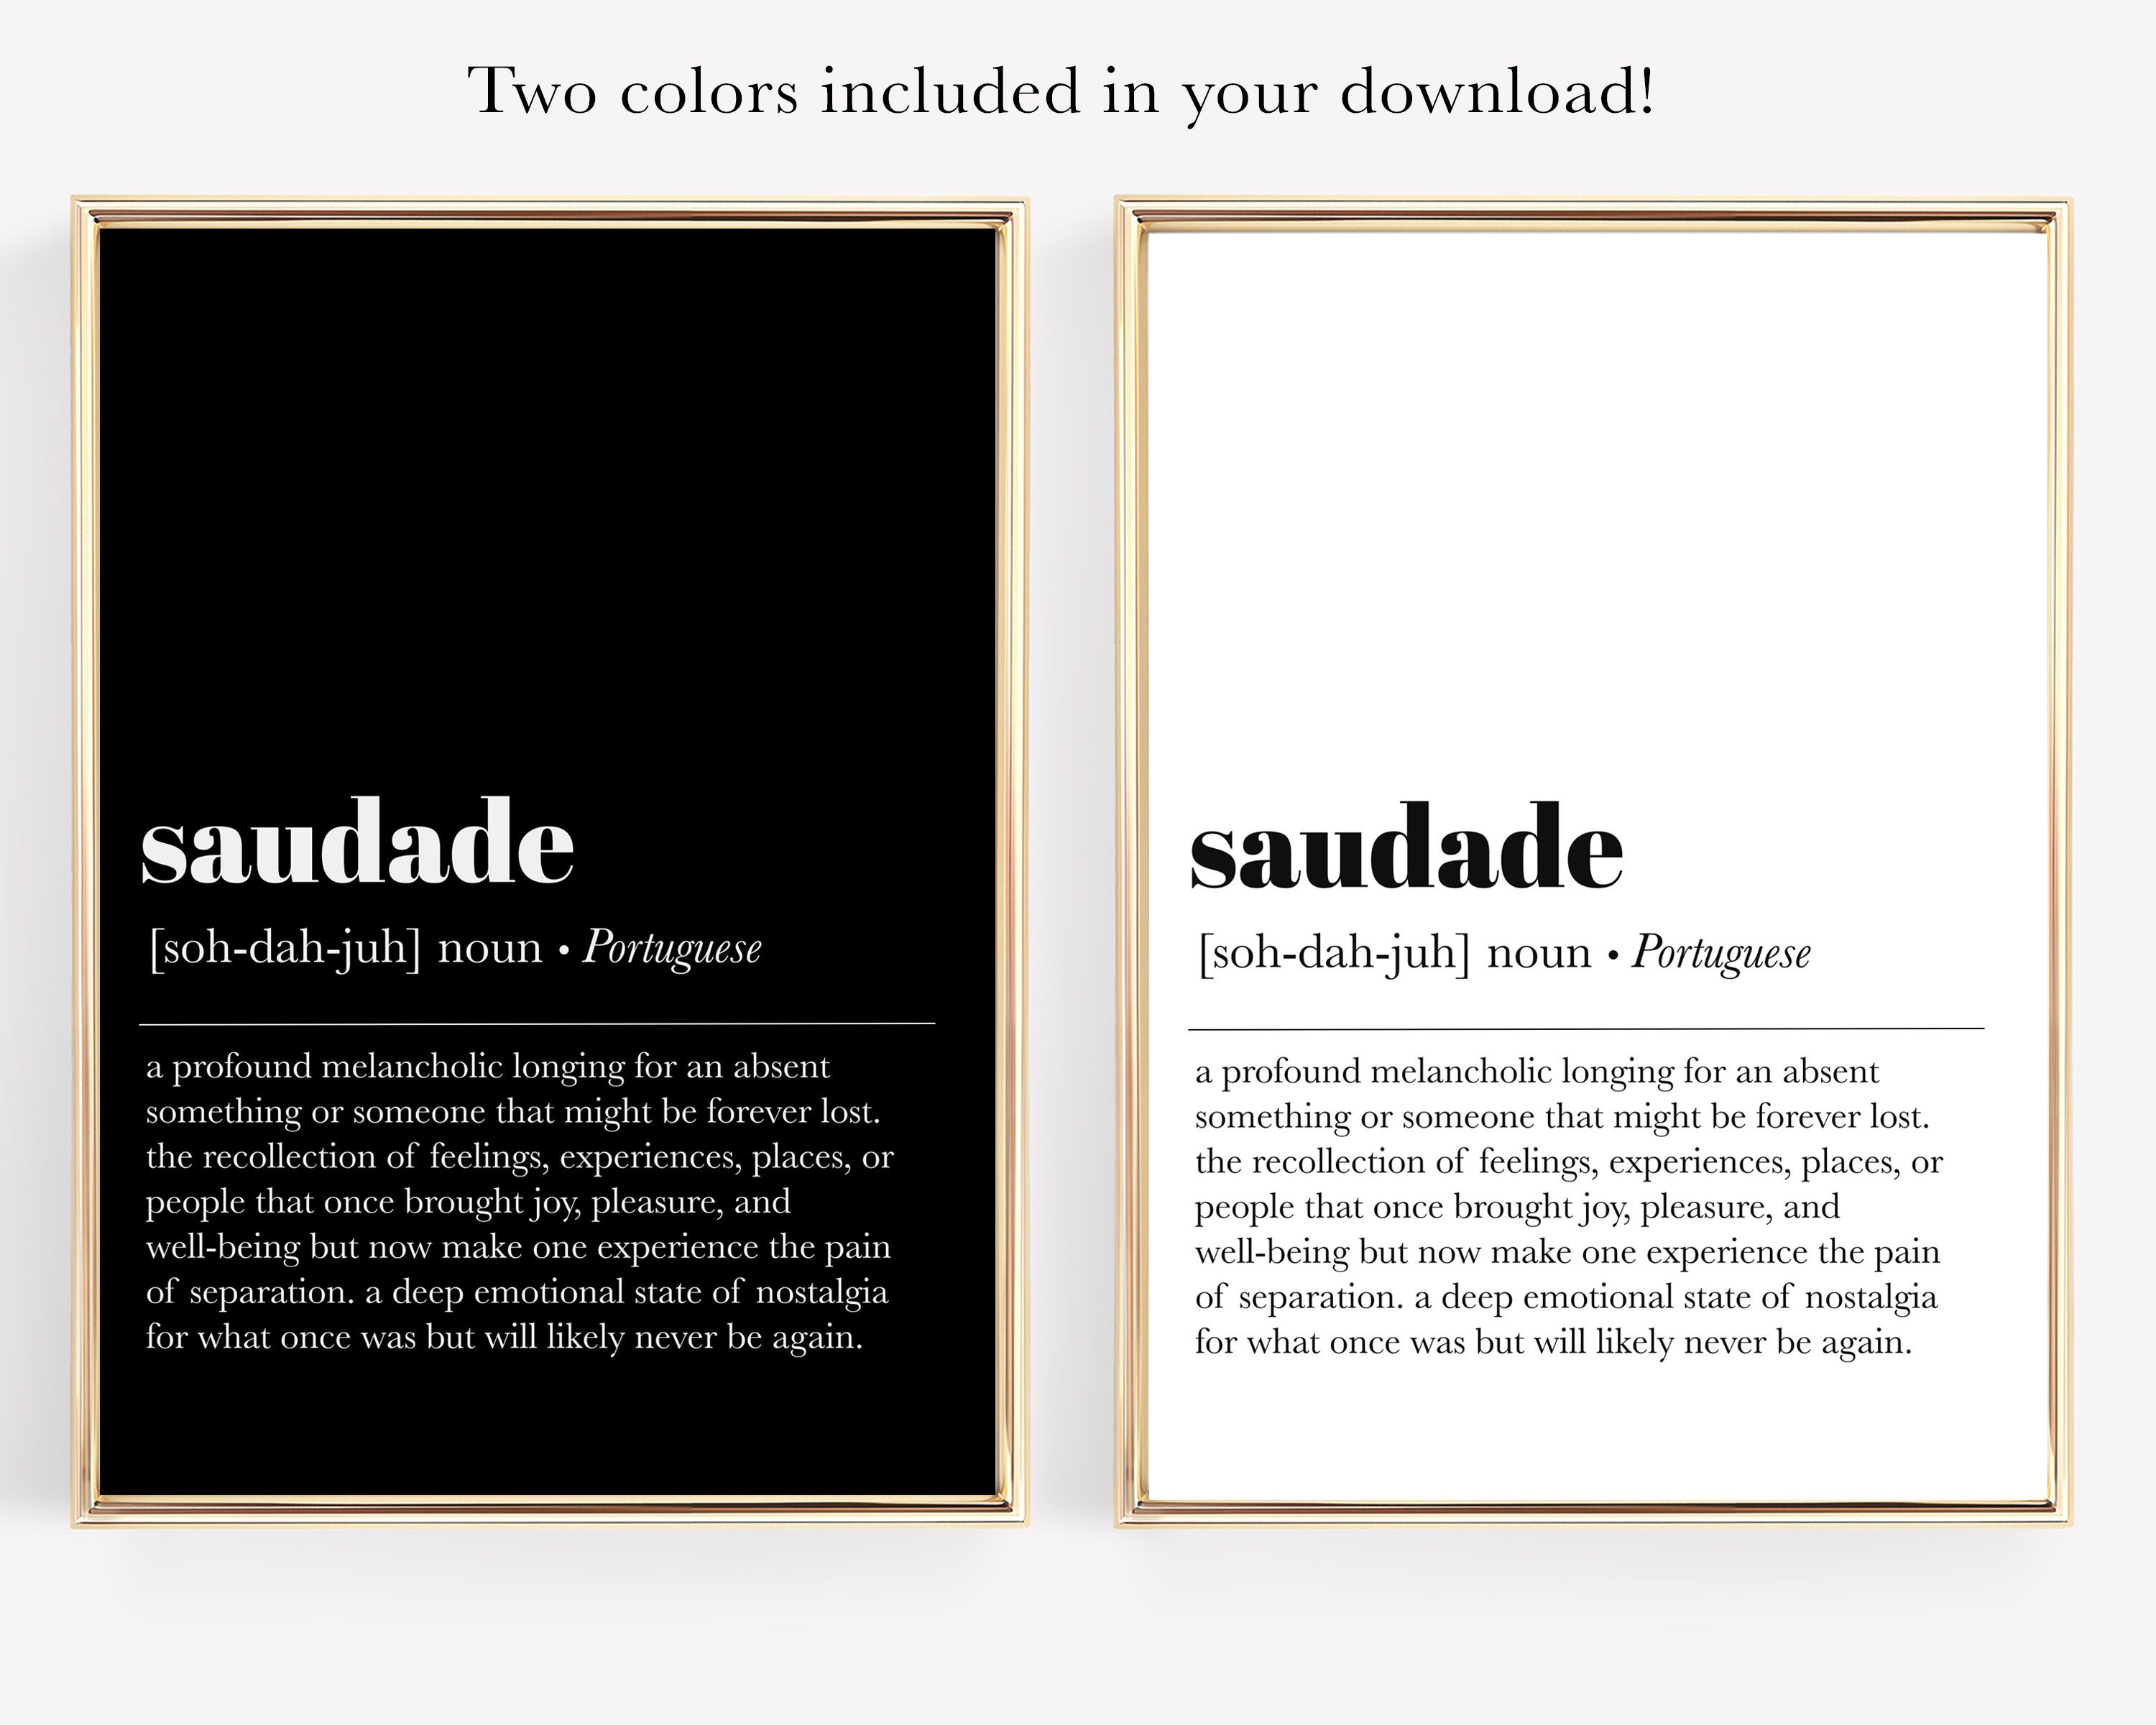 Saudade - Portuguese Word Definition (white) Poster for Sale by Everyday  Inspiration